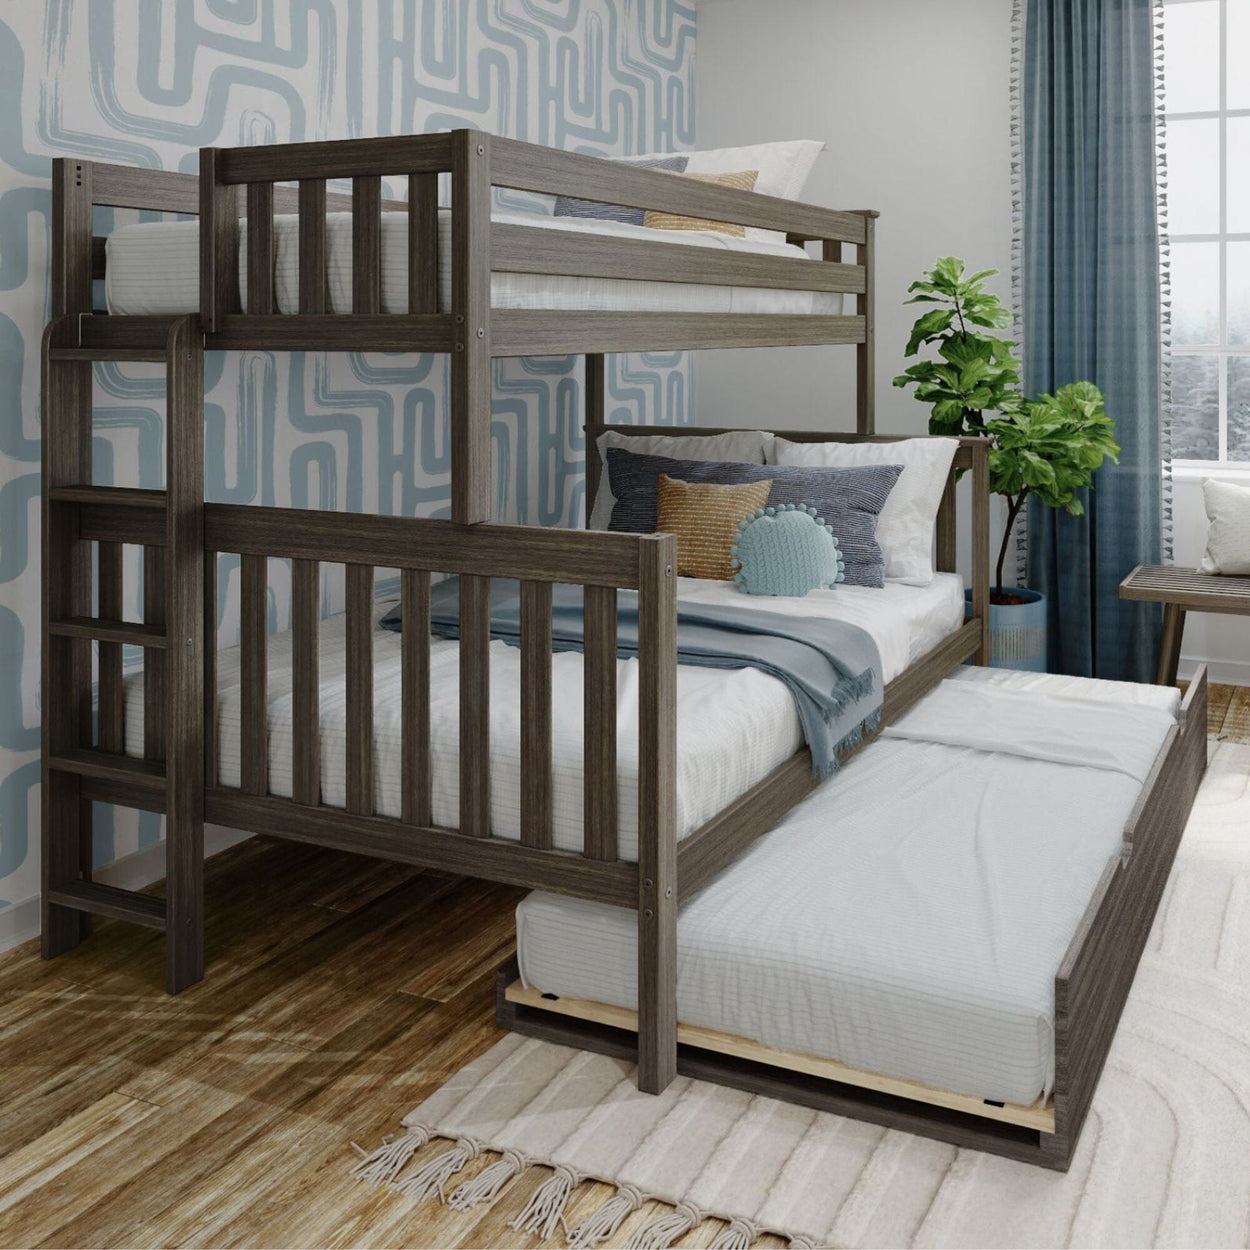 186335-151 : Bunk Beds Twin over Full Bunk Bed with Ladder on End and Trundle, Clay